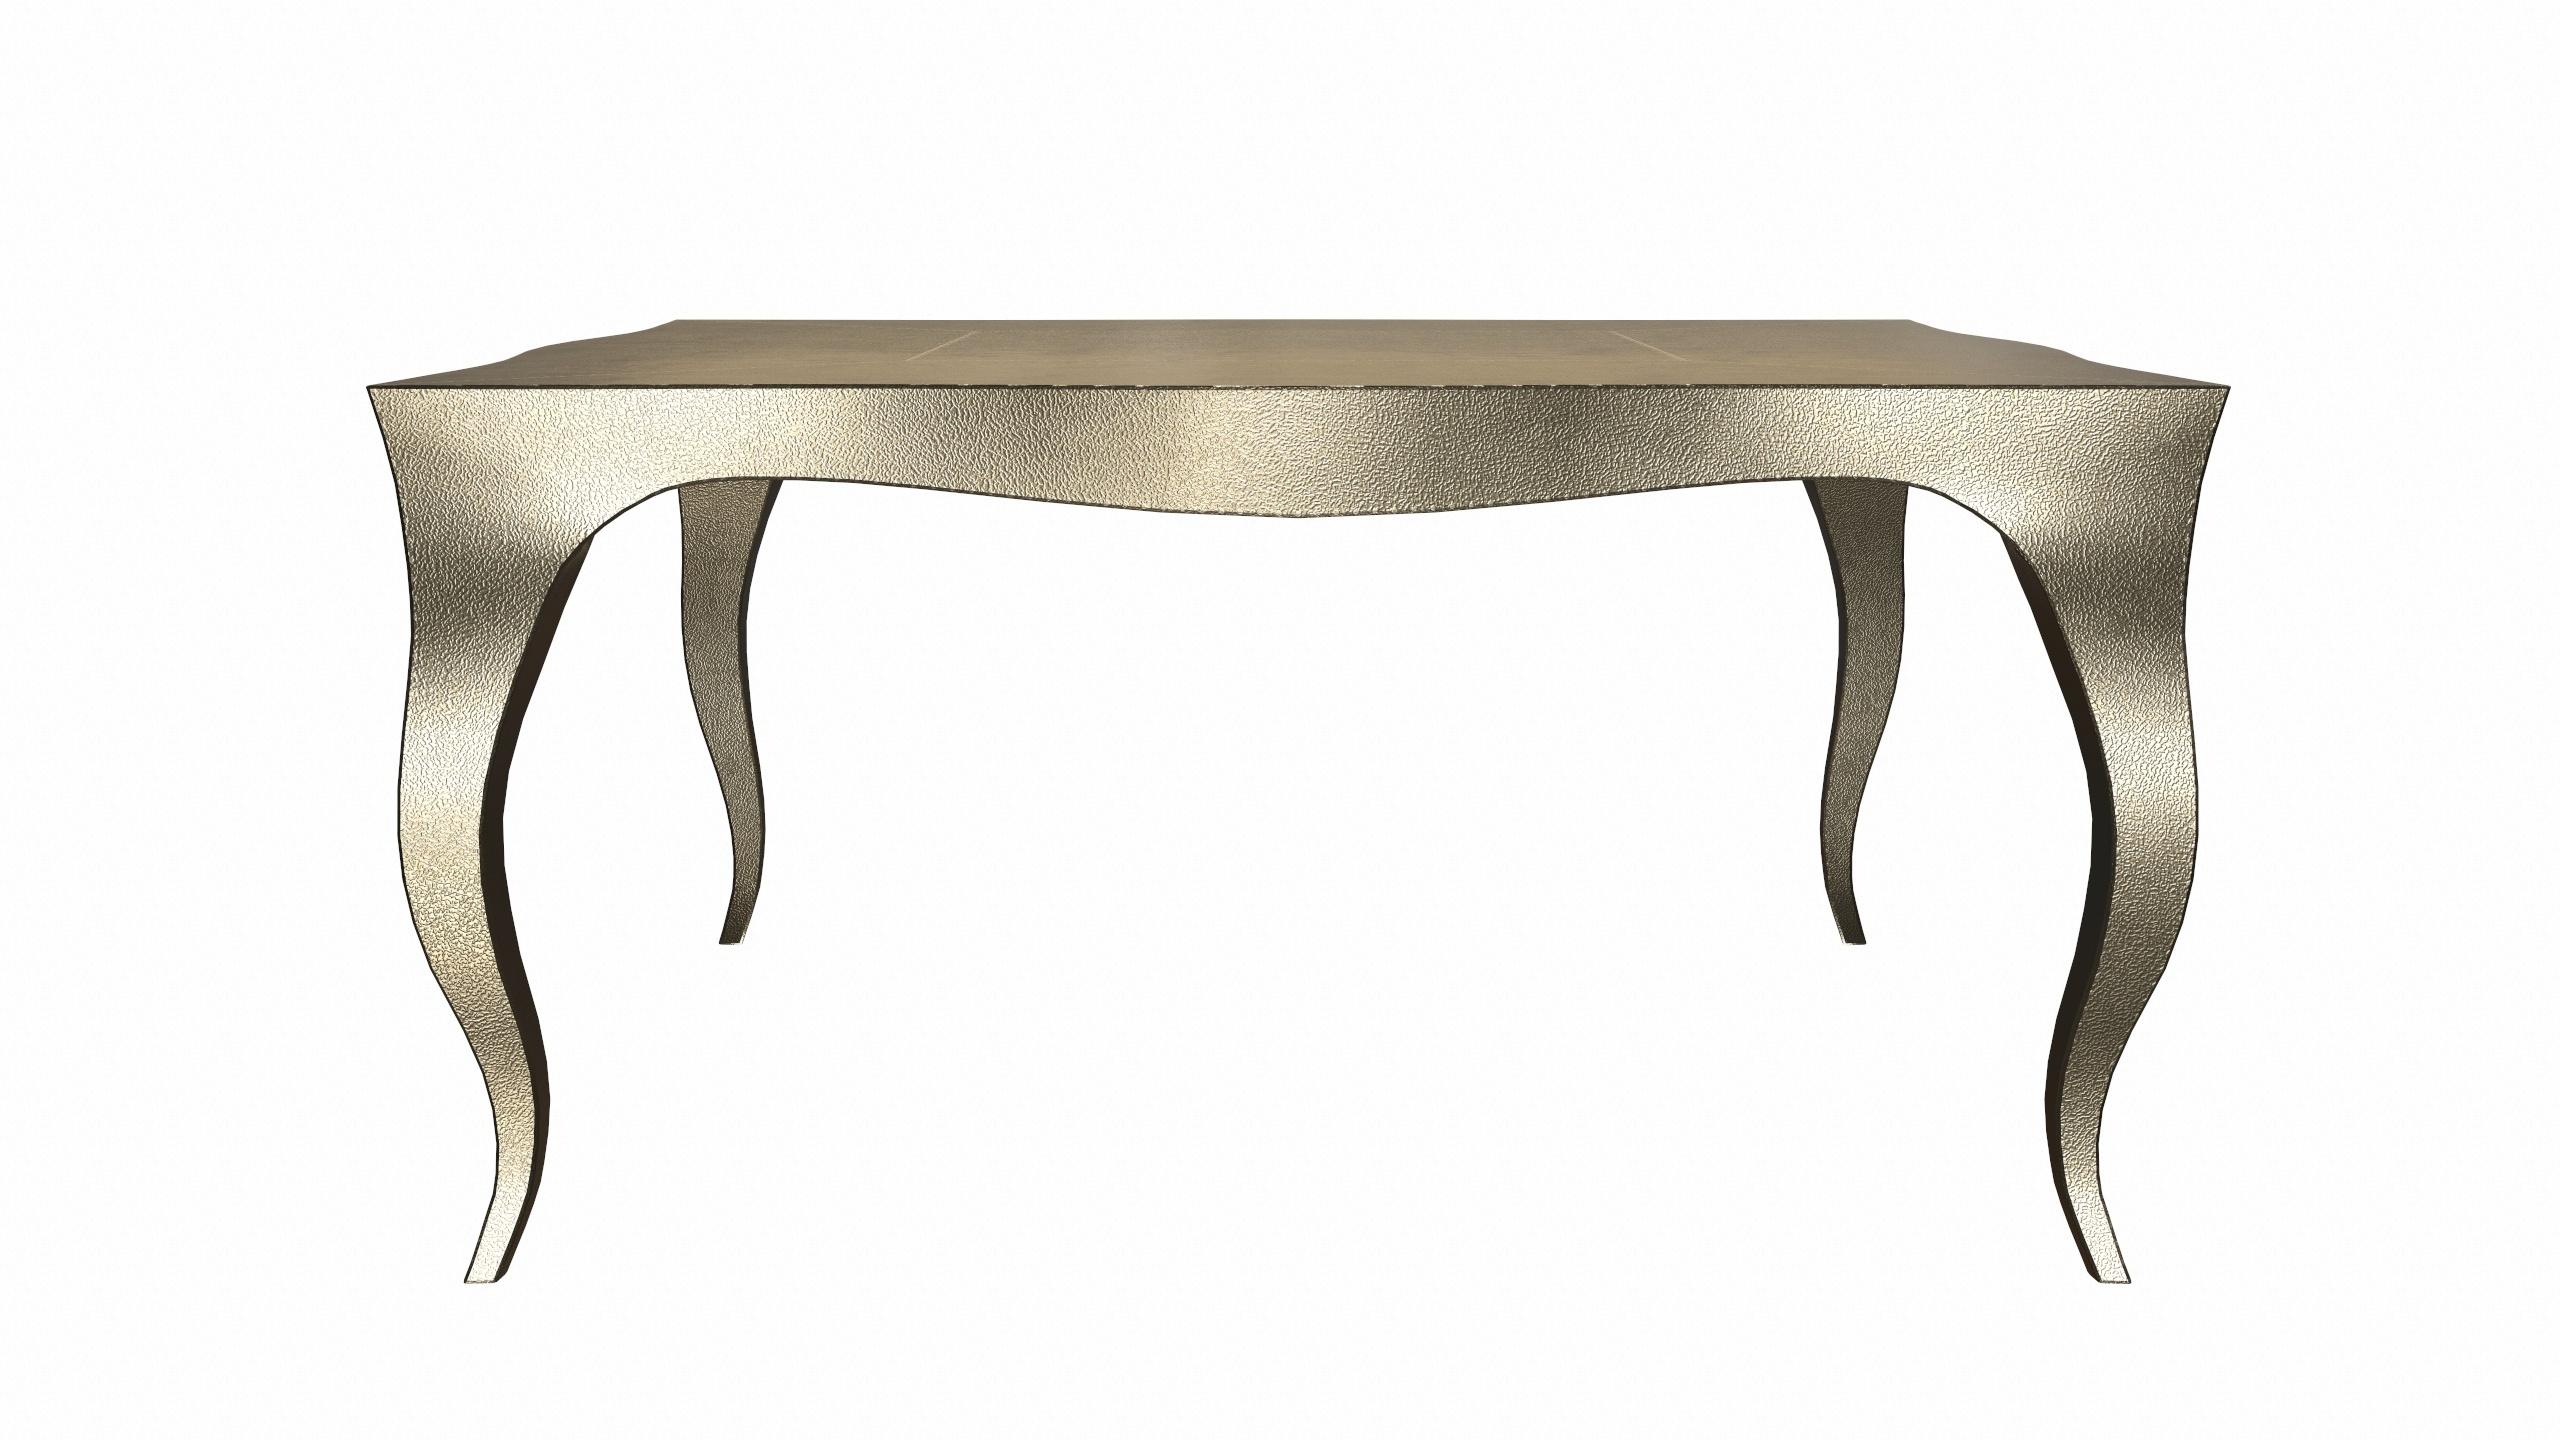 Américain Louise Art Deco Coffee and Cocktail Tables Fine Hammered Brass 18.5x18.5x10 inch en vente